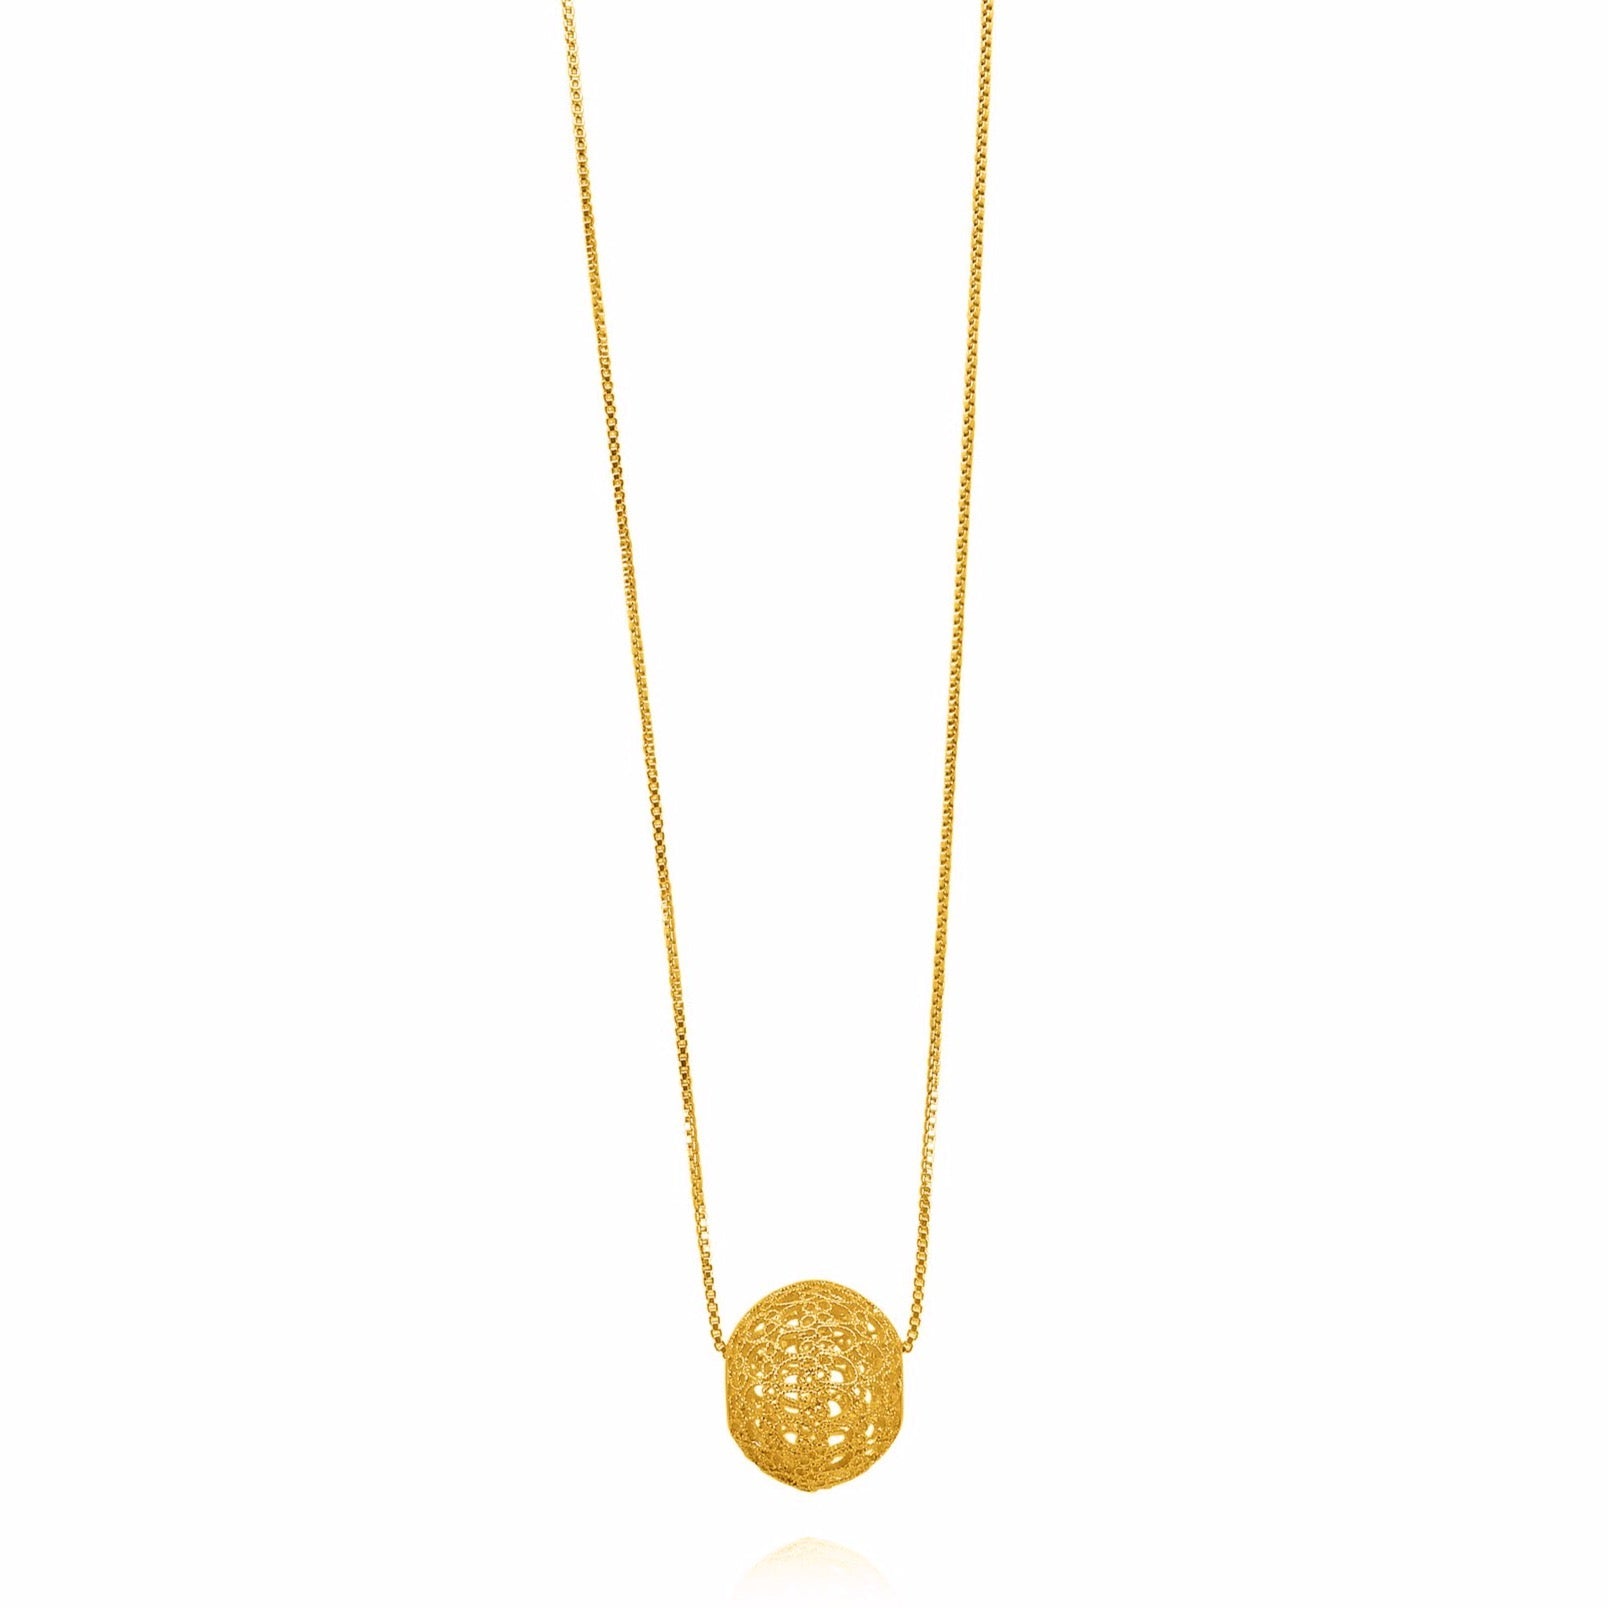 LUCRECIA GOLD SMALL SPHERE LONG NECKLACE FILIGREE